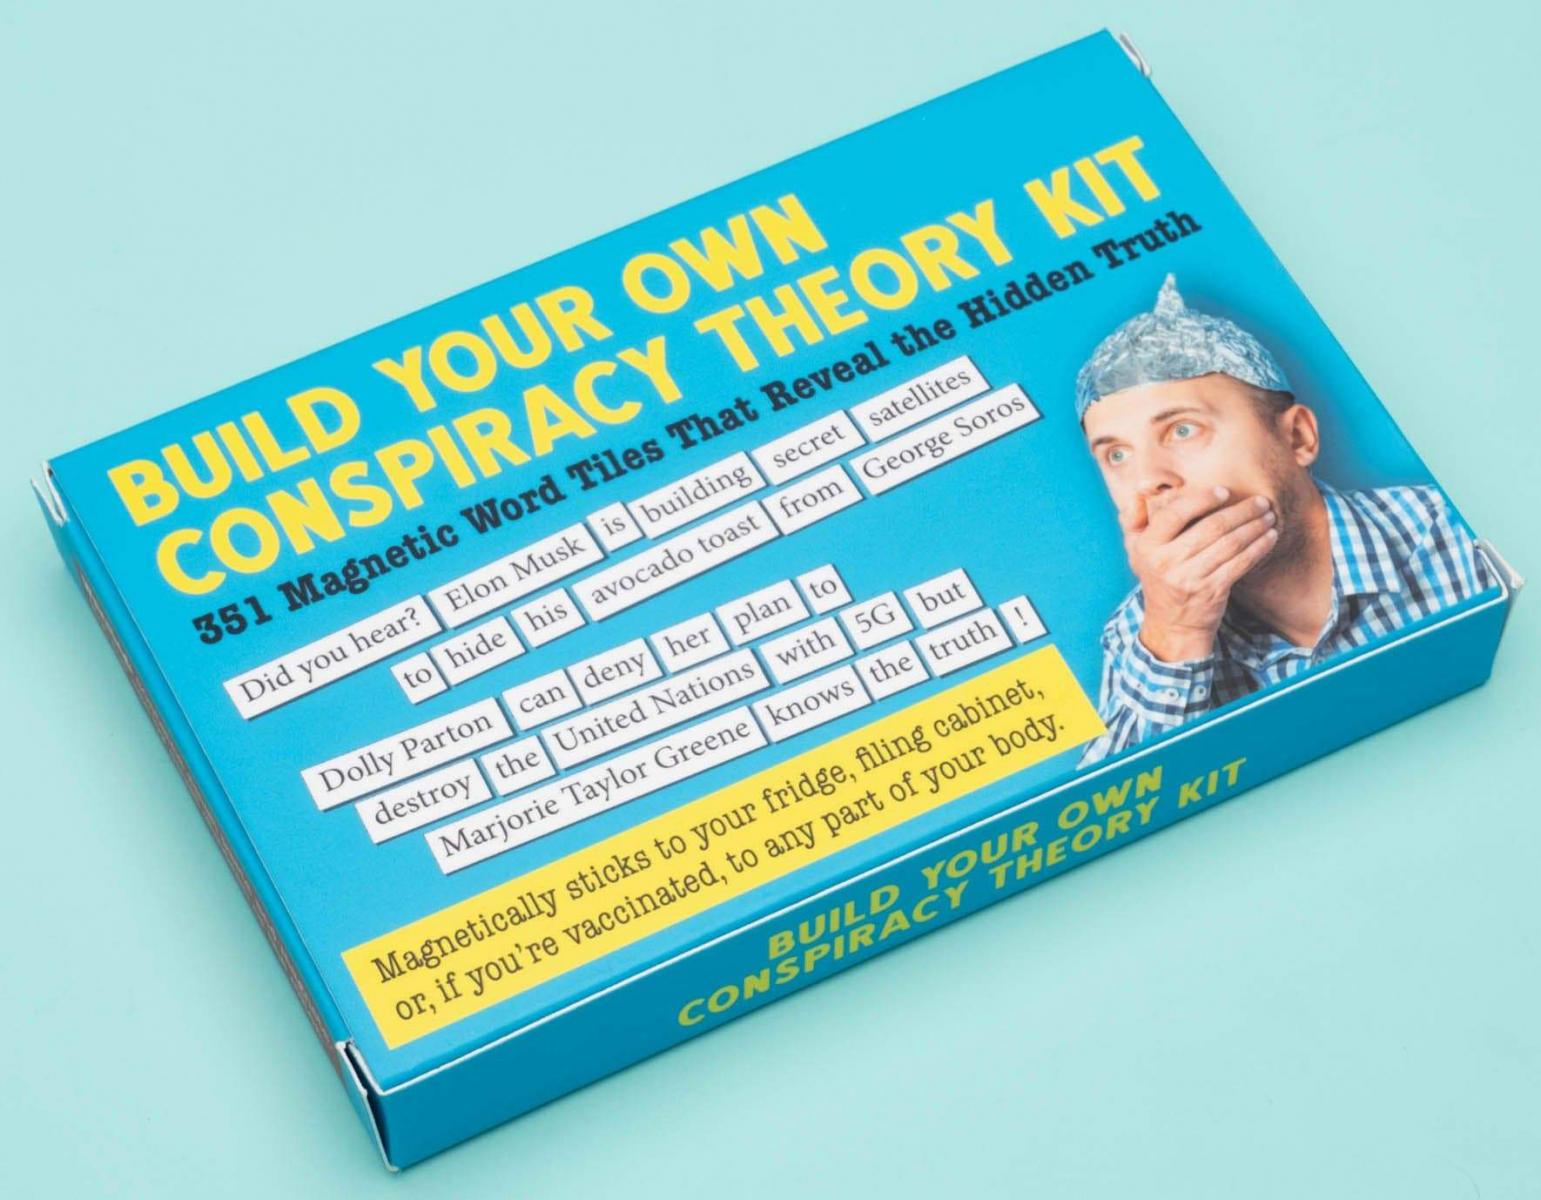 Dissent Pins build your own conspiracy theory kit - funny fridge magnet  word games for adults (451 word tiles)